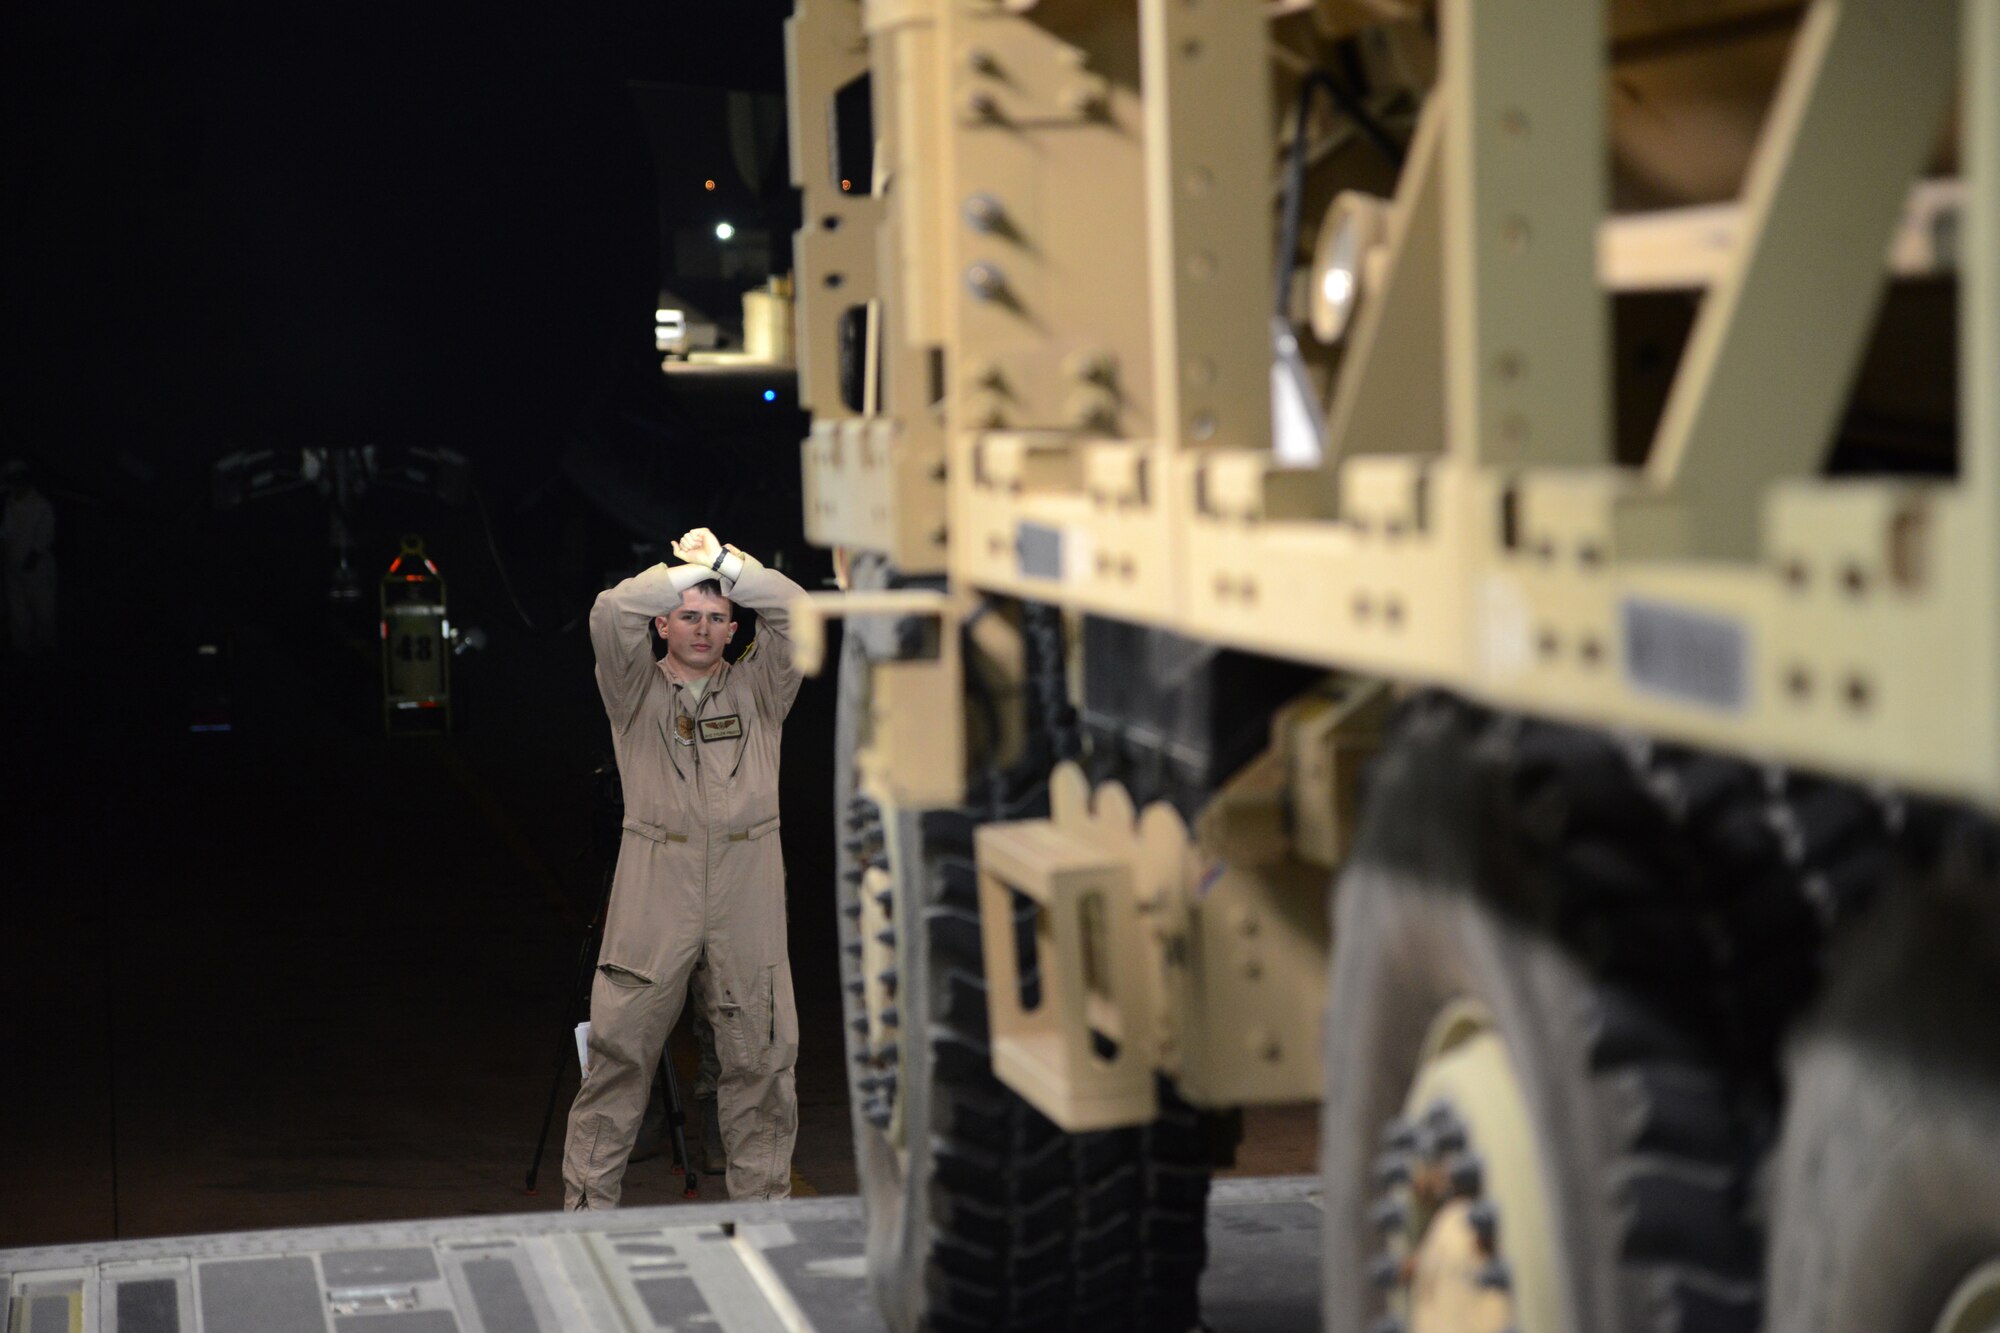 Airman 1st Class Tyler Pruitt, 386th Air Expeditionary Operations Group, guides the last to two Mine Resistant Armored Personnel carriers on a C-17 Globemaster III bound for Erbil, Iraq, Dec. 30, 2014. The MRAPs are for the Iraqi Security Forces and Peshmerga to aid in the fight against Daish. (U.S. Air force photo by Tech. Sgt. Jared Marquis/released)